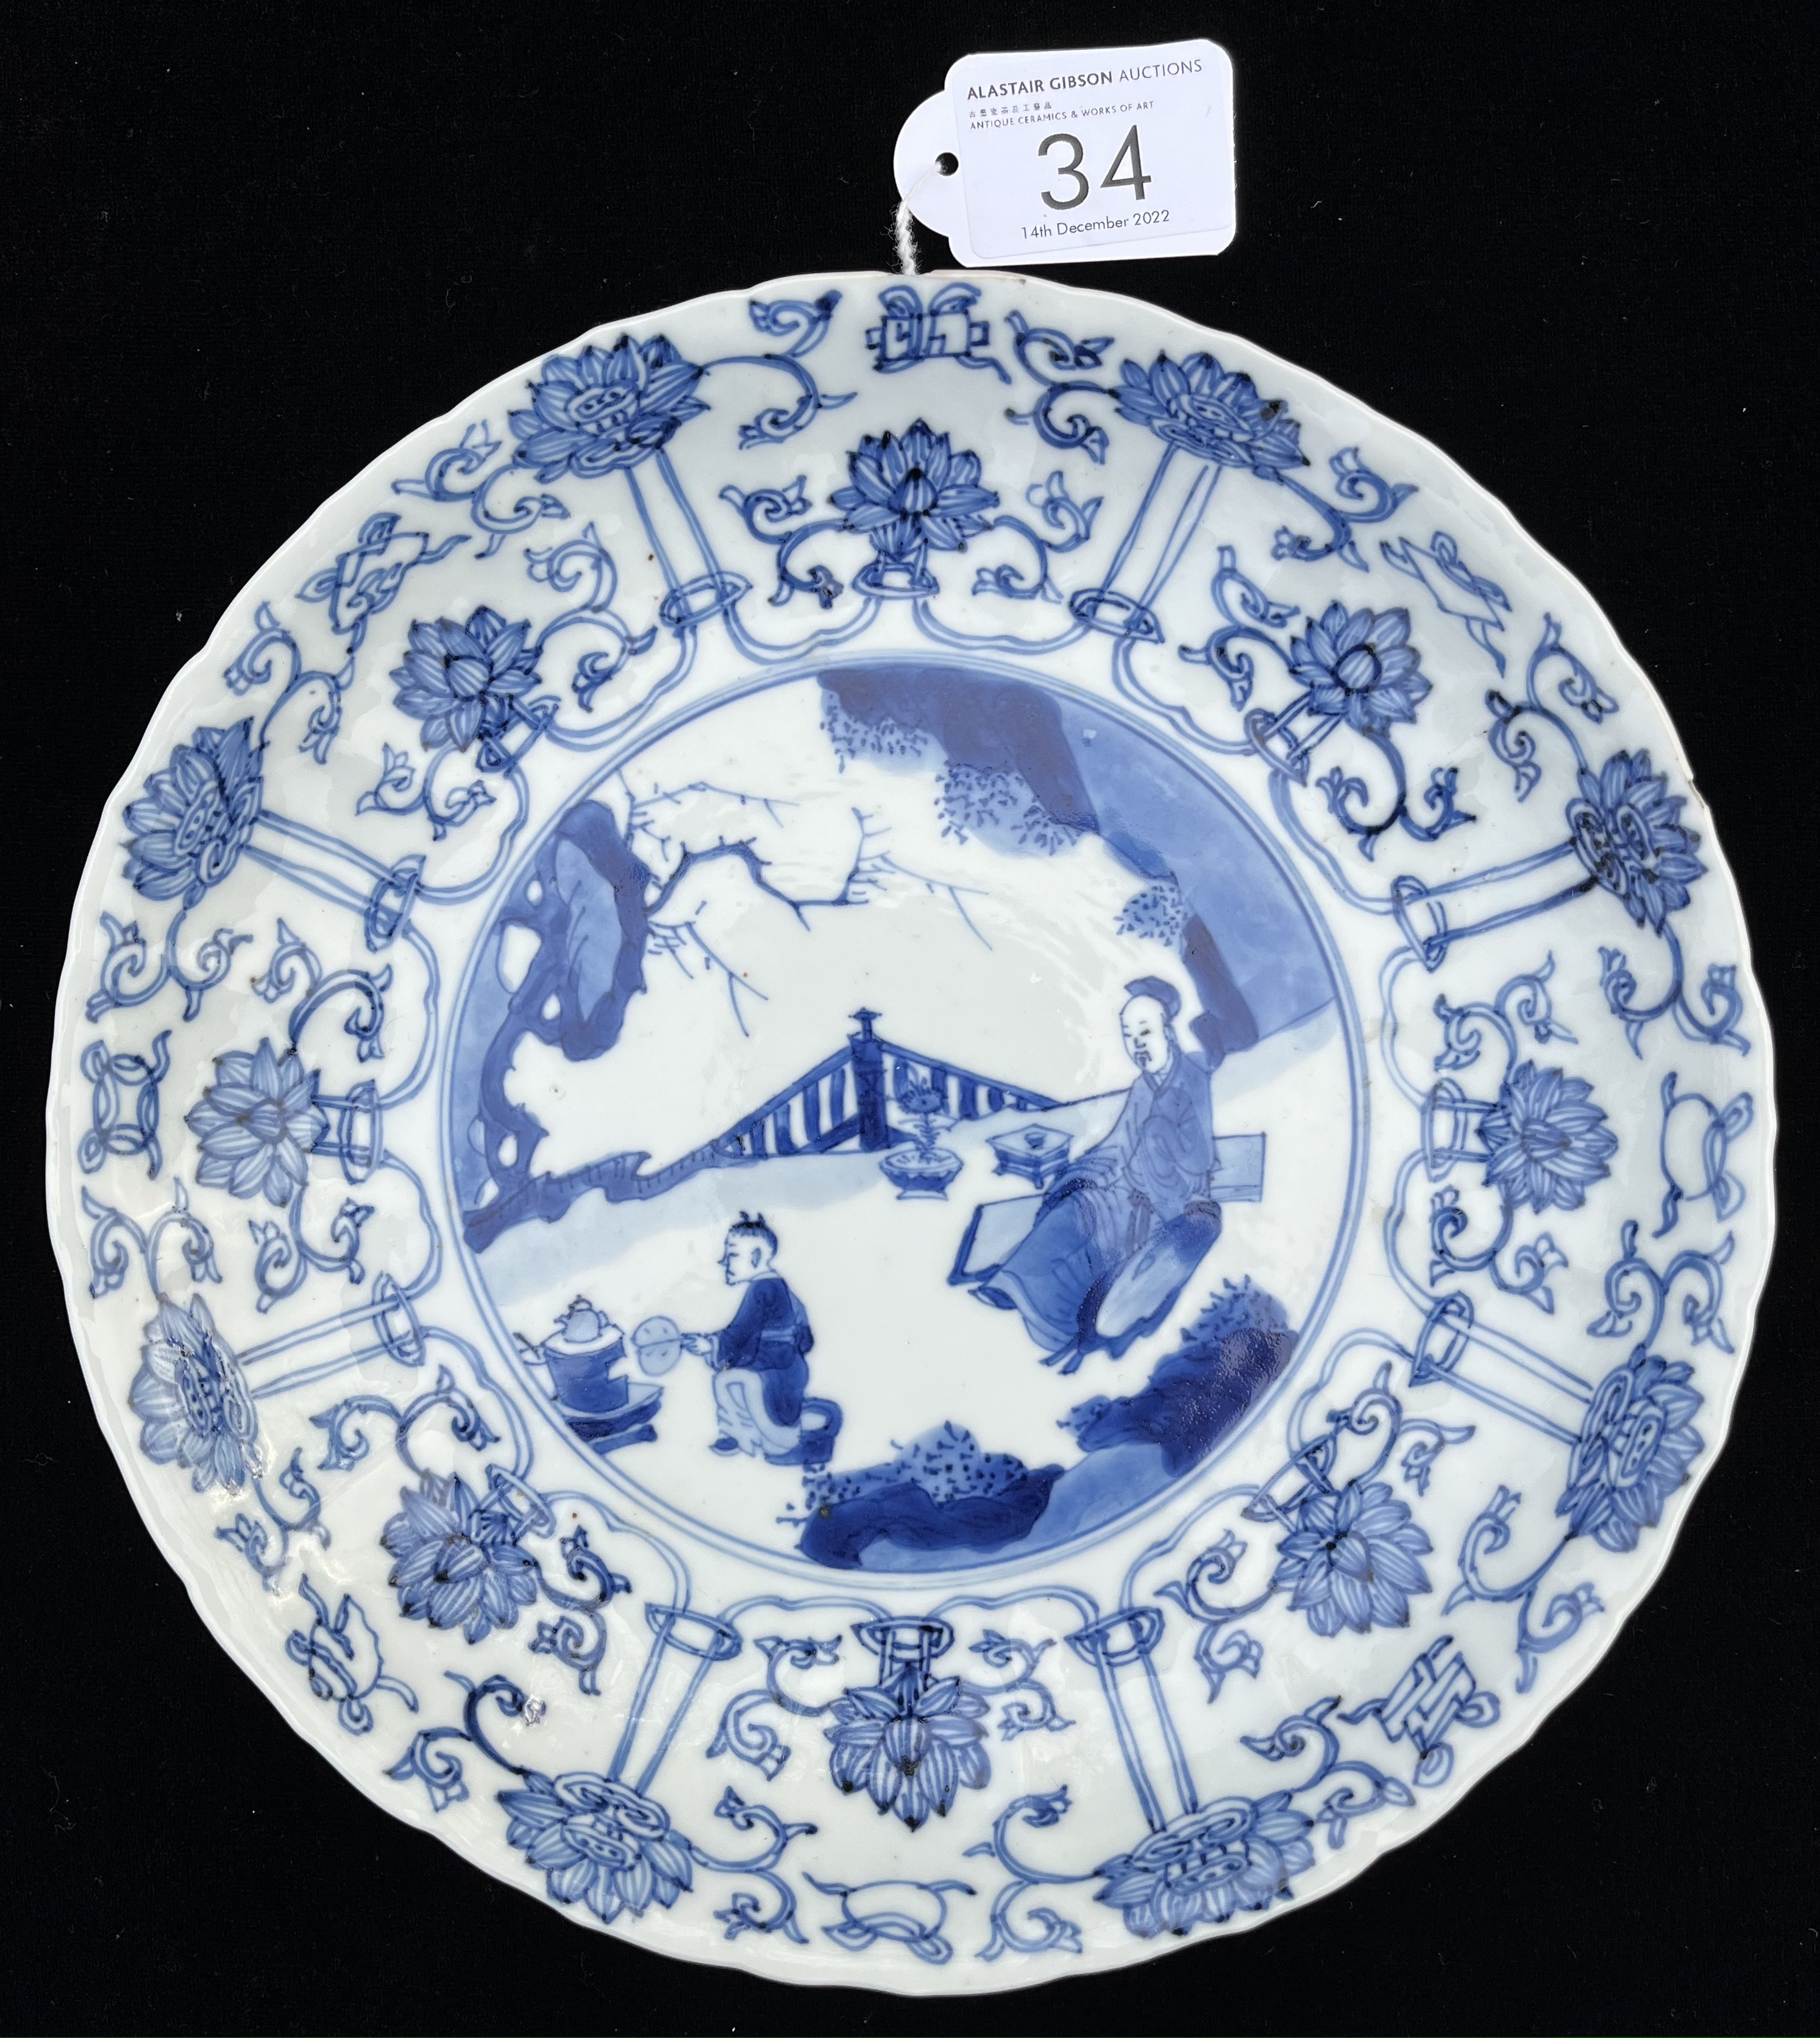 A CHINESE BLUE AND WHITE PORCELAIN SAUCER DISH, QING DYNASTY, KANGXI MARK AND PERIOD, 1662 – 1722 - Image 2 of 6